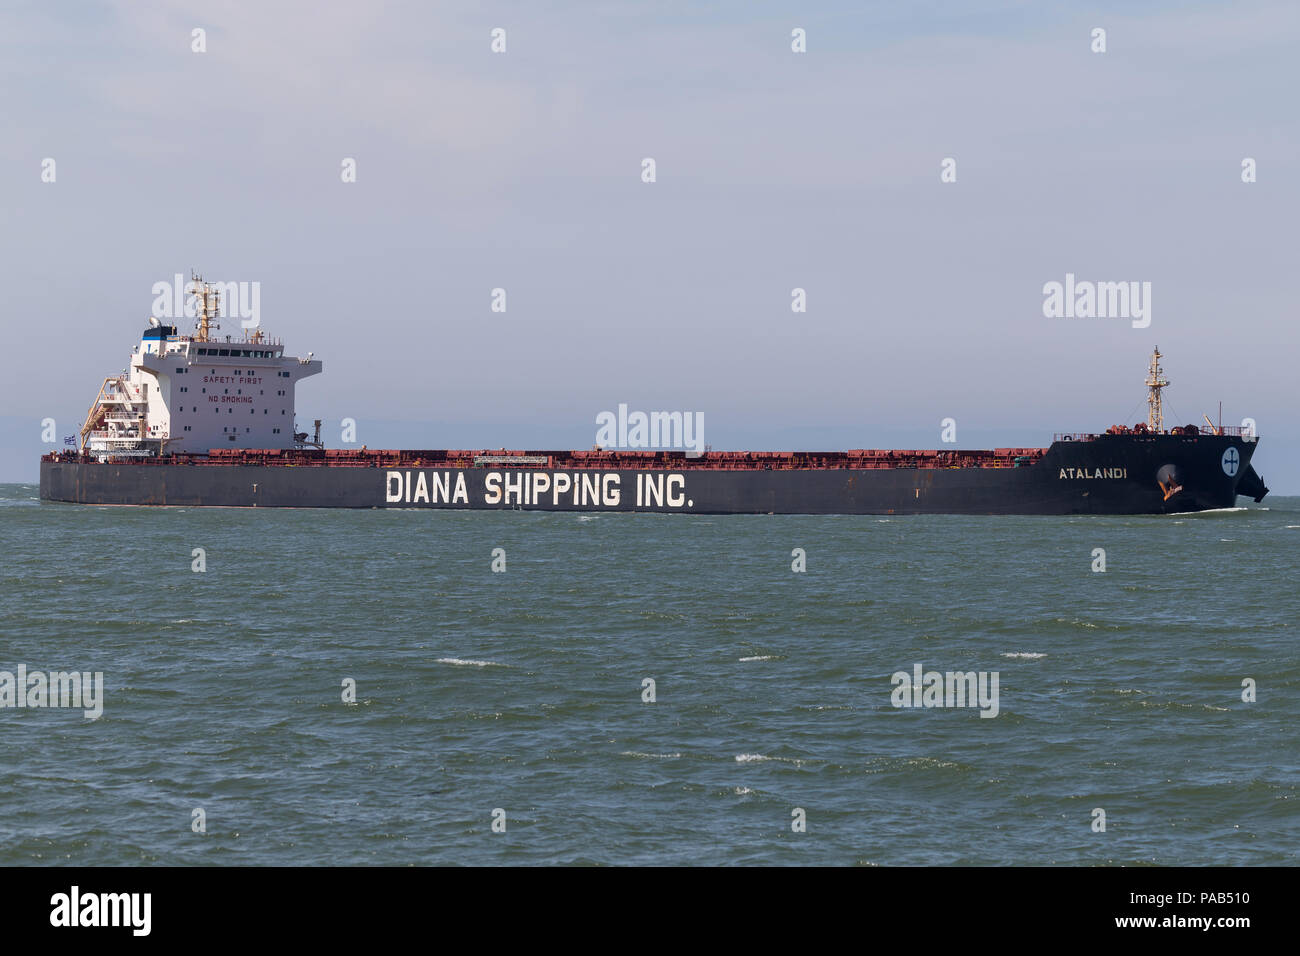 Bulk carrier ATALANDI inbound Rotterdam. Diana Shipping is an Athens based provider of shipping transportation services and is listed on the NYSE. Stock Photo